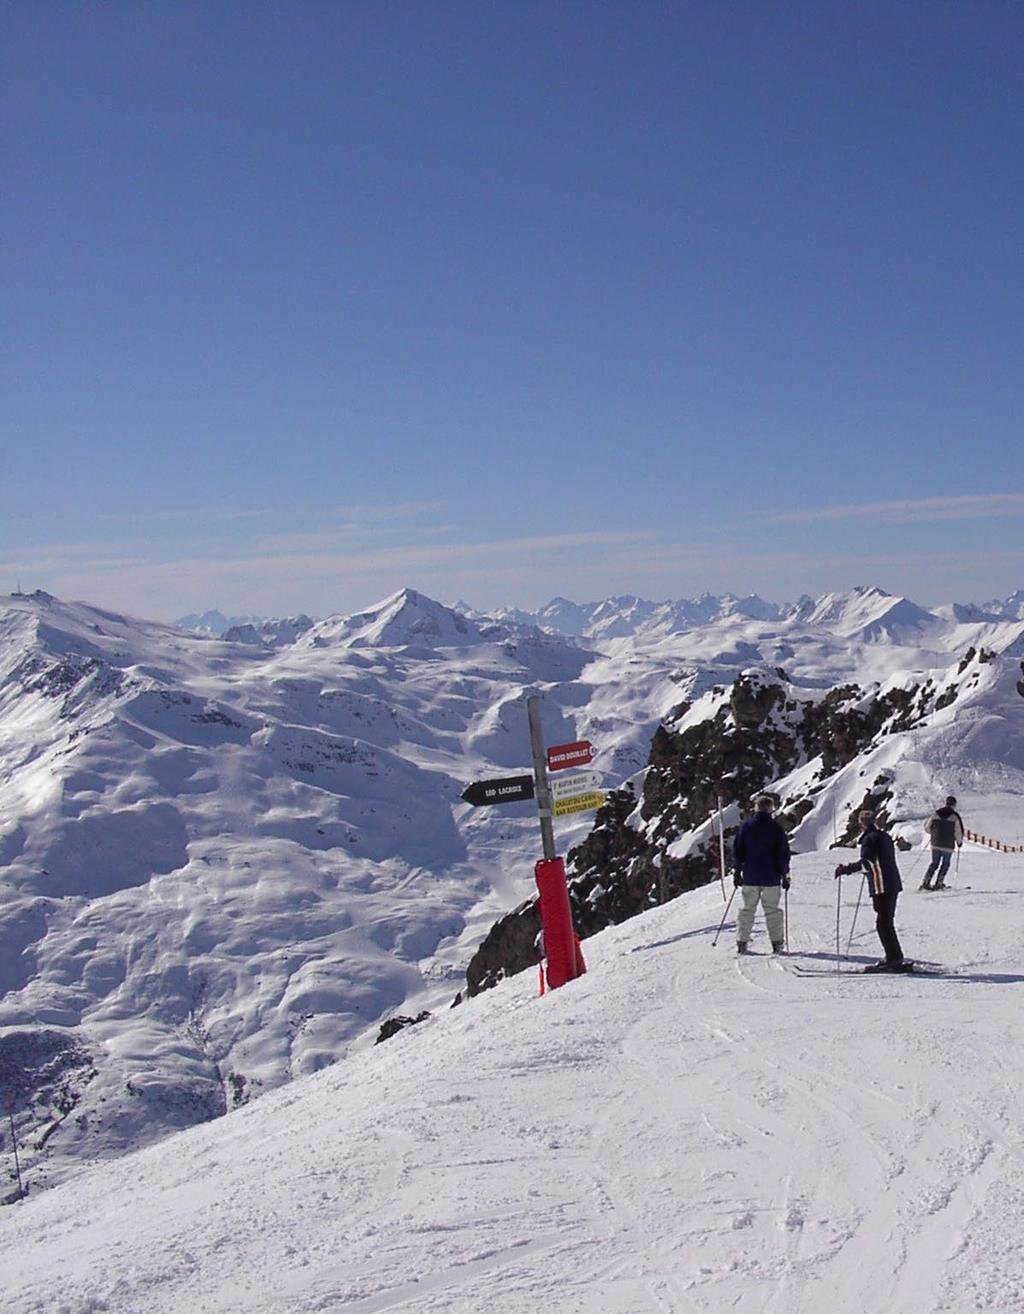 The Trois Vallees is the largest fully connected ski area in the world, with 600km of skiing spread across its three valleys.